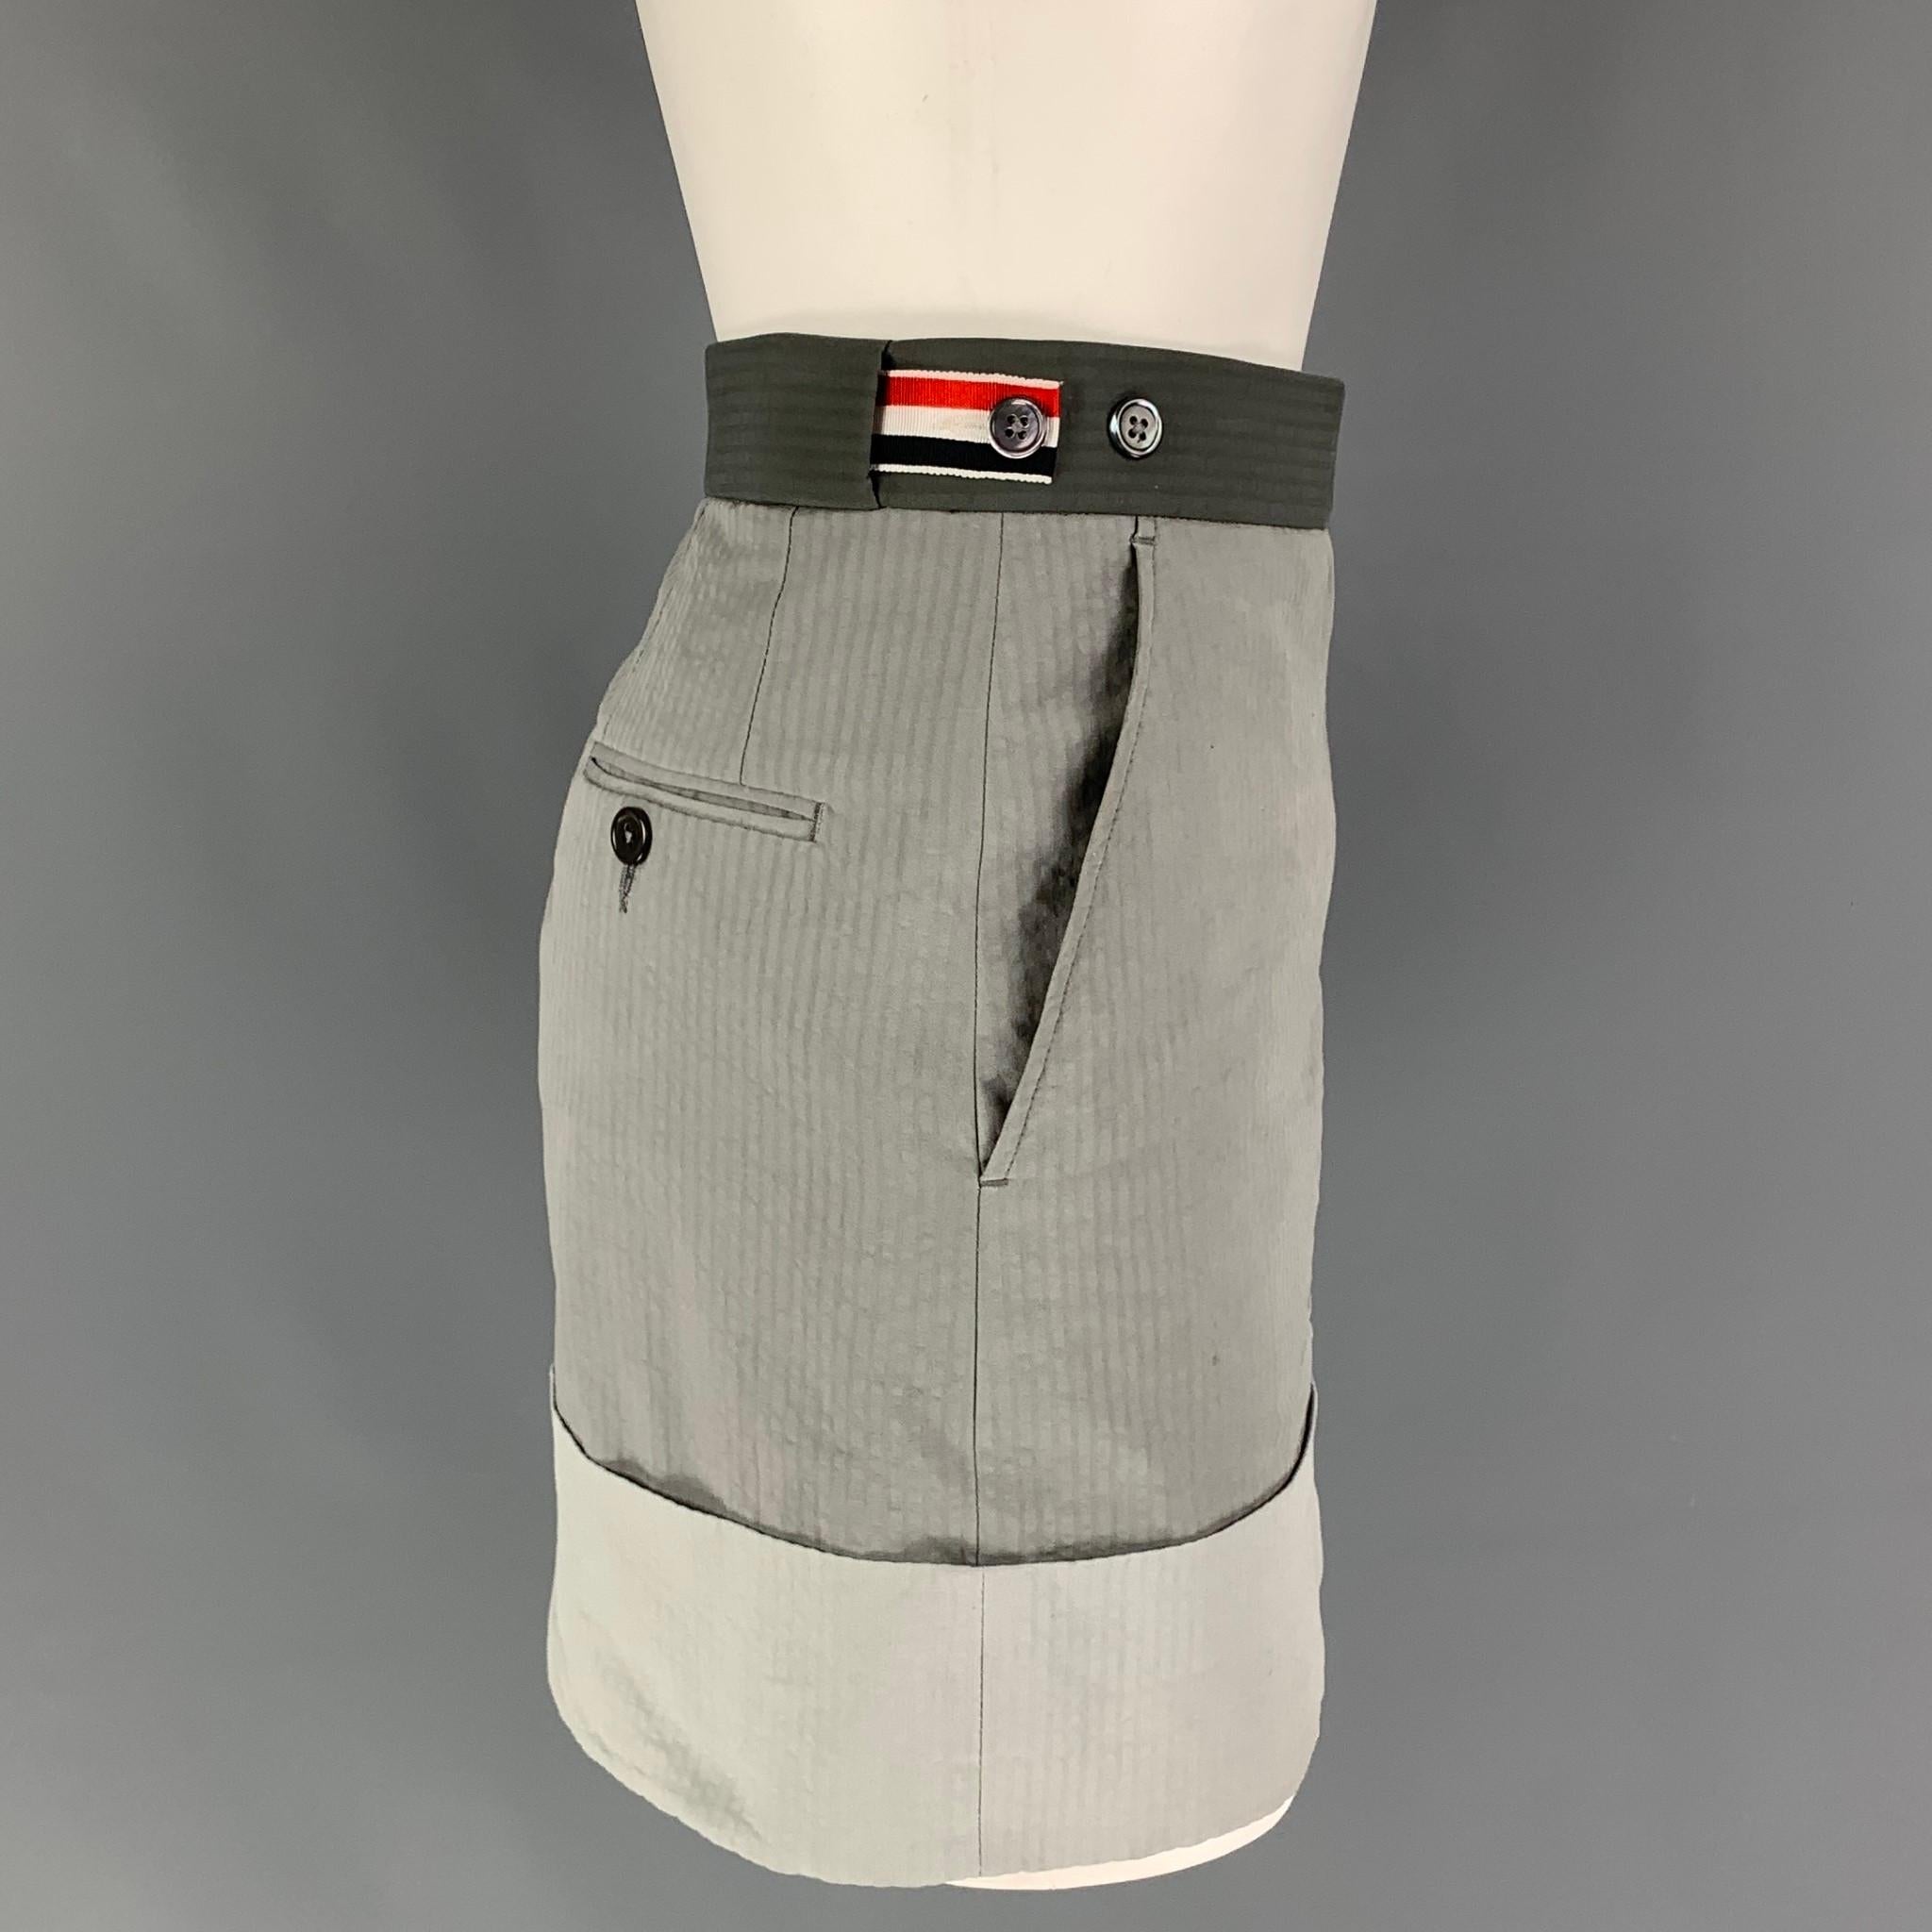 THOM BROWNE skirt comes in a grey & light grey color block with a stripe interior featuring a mini style, cuffed hem, side stripe tabs, front tab, slit pockets, and a zip fly closure. Made in Italy.

Very Good Pre-Owned Condition.
Marked: